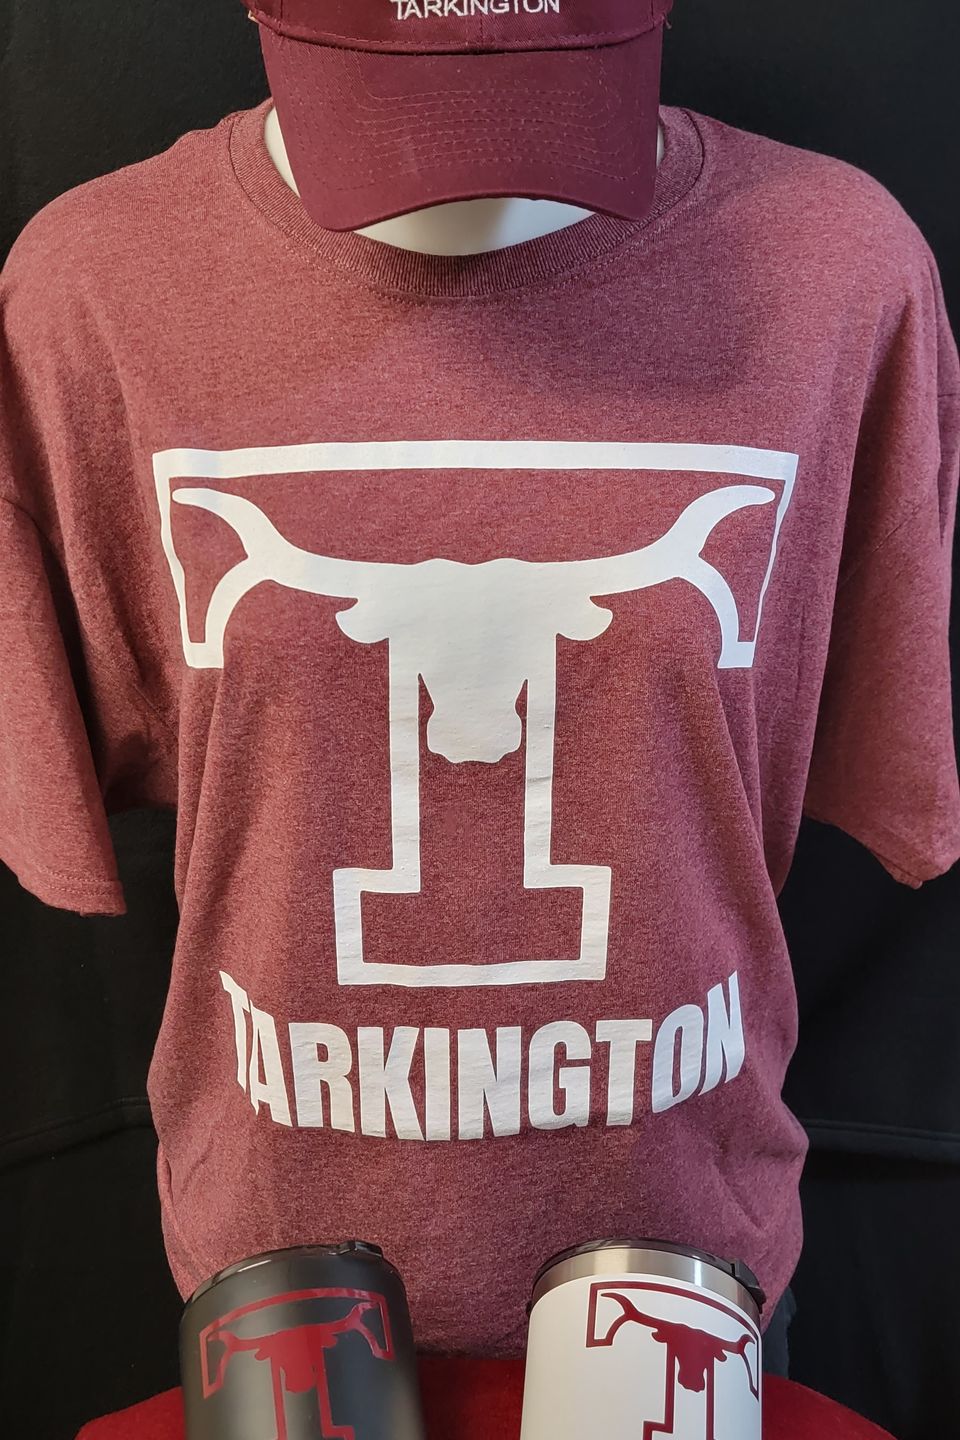 Tarkington Independent School District logo on tumblers, t-shirt, and cap. Presented by SaRi's Creations.